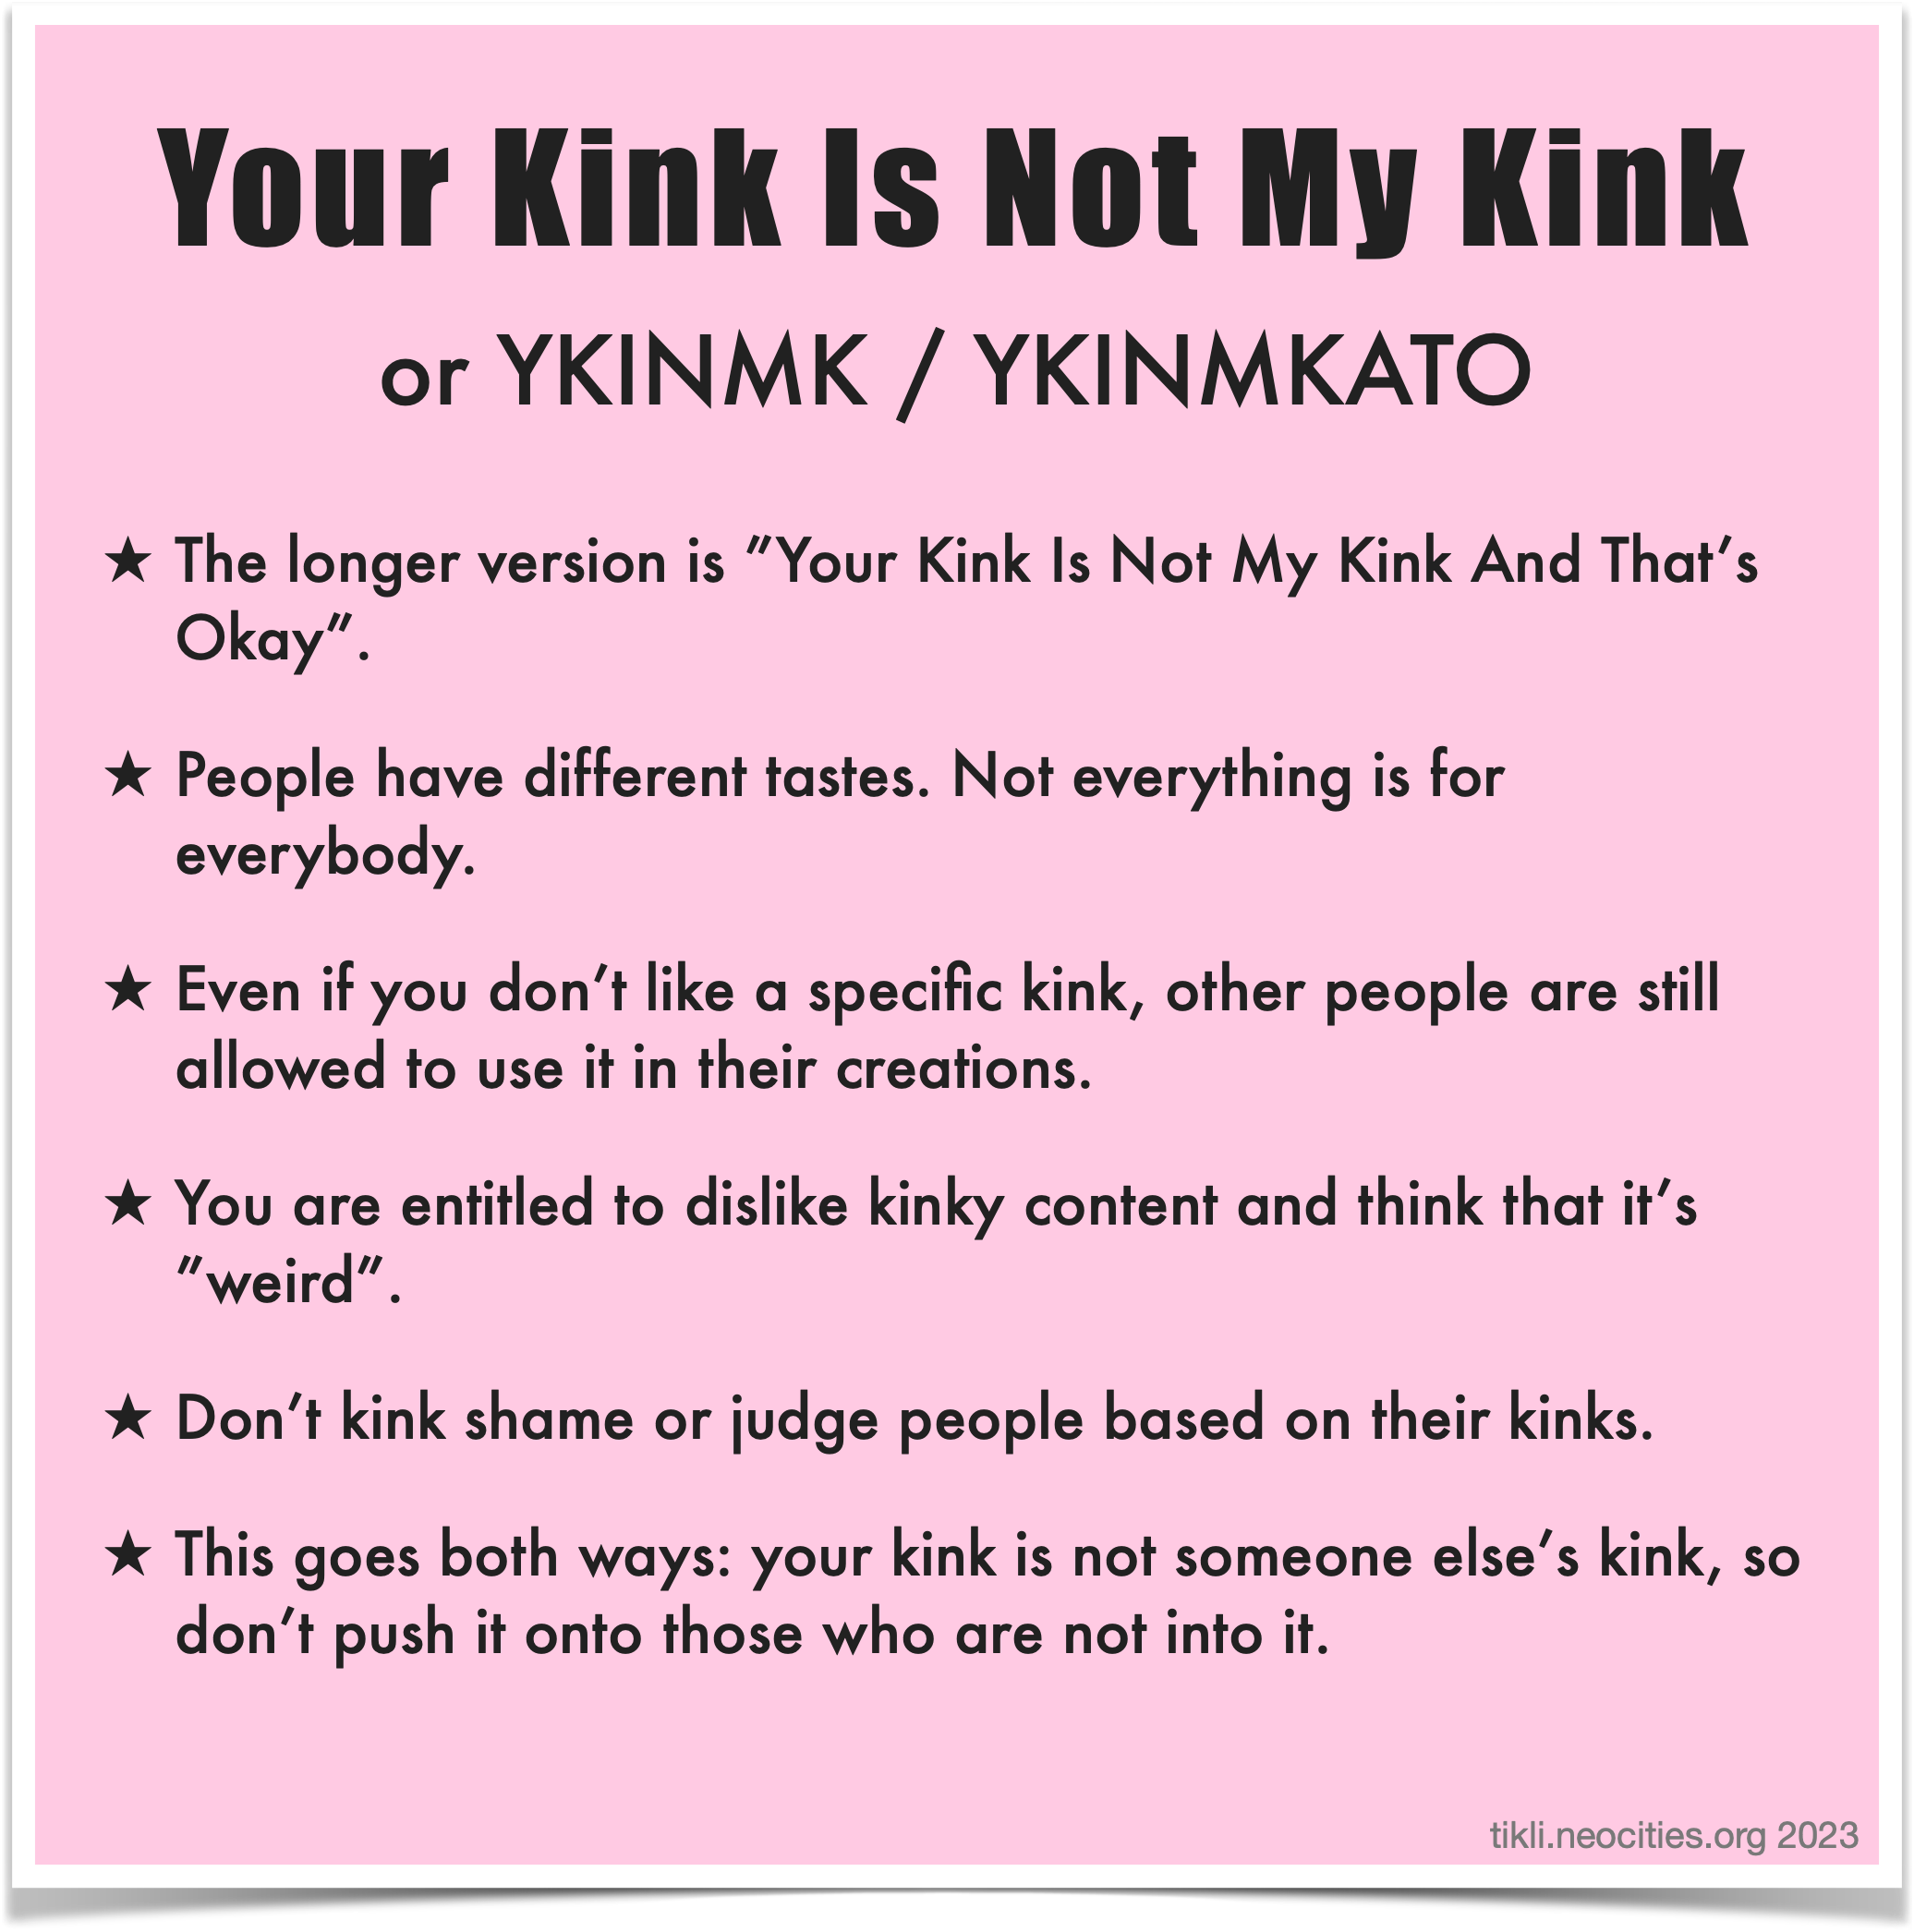 An infographic that looks like a pink sticky note, containing the Your Kink Is Not My Kink bullet points that precede the image.